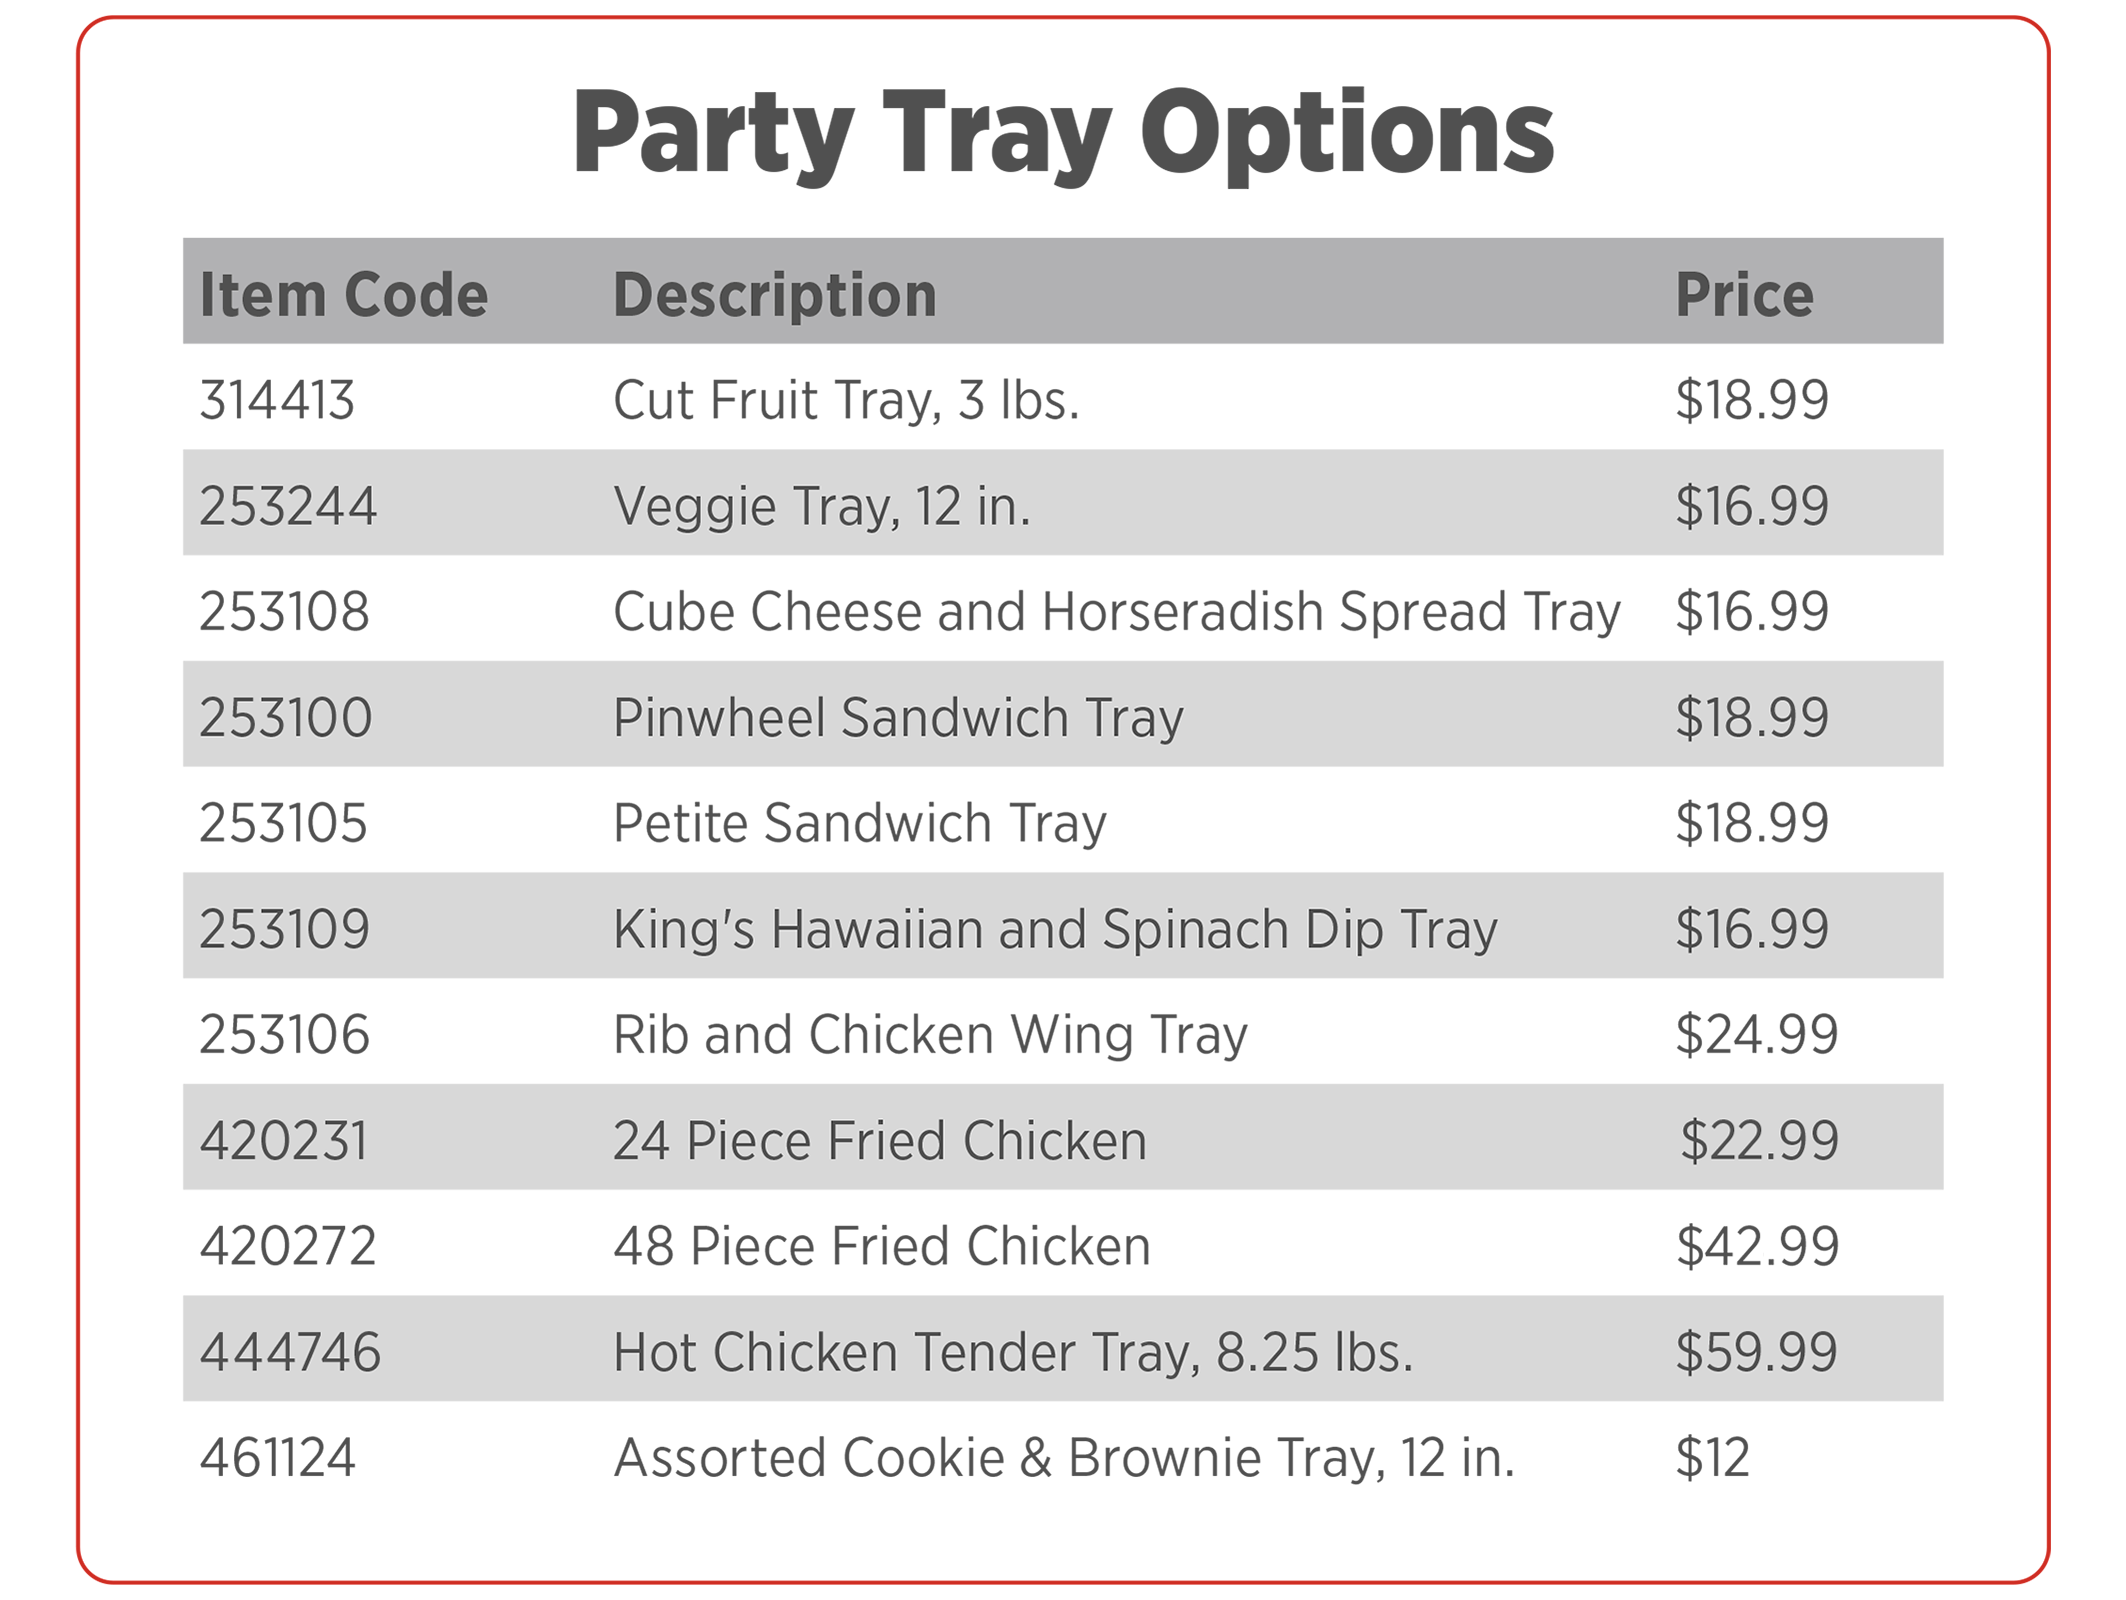 Party Tray Options